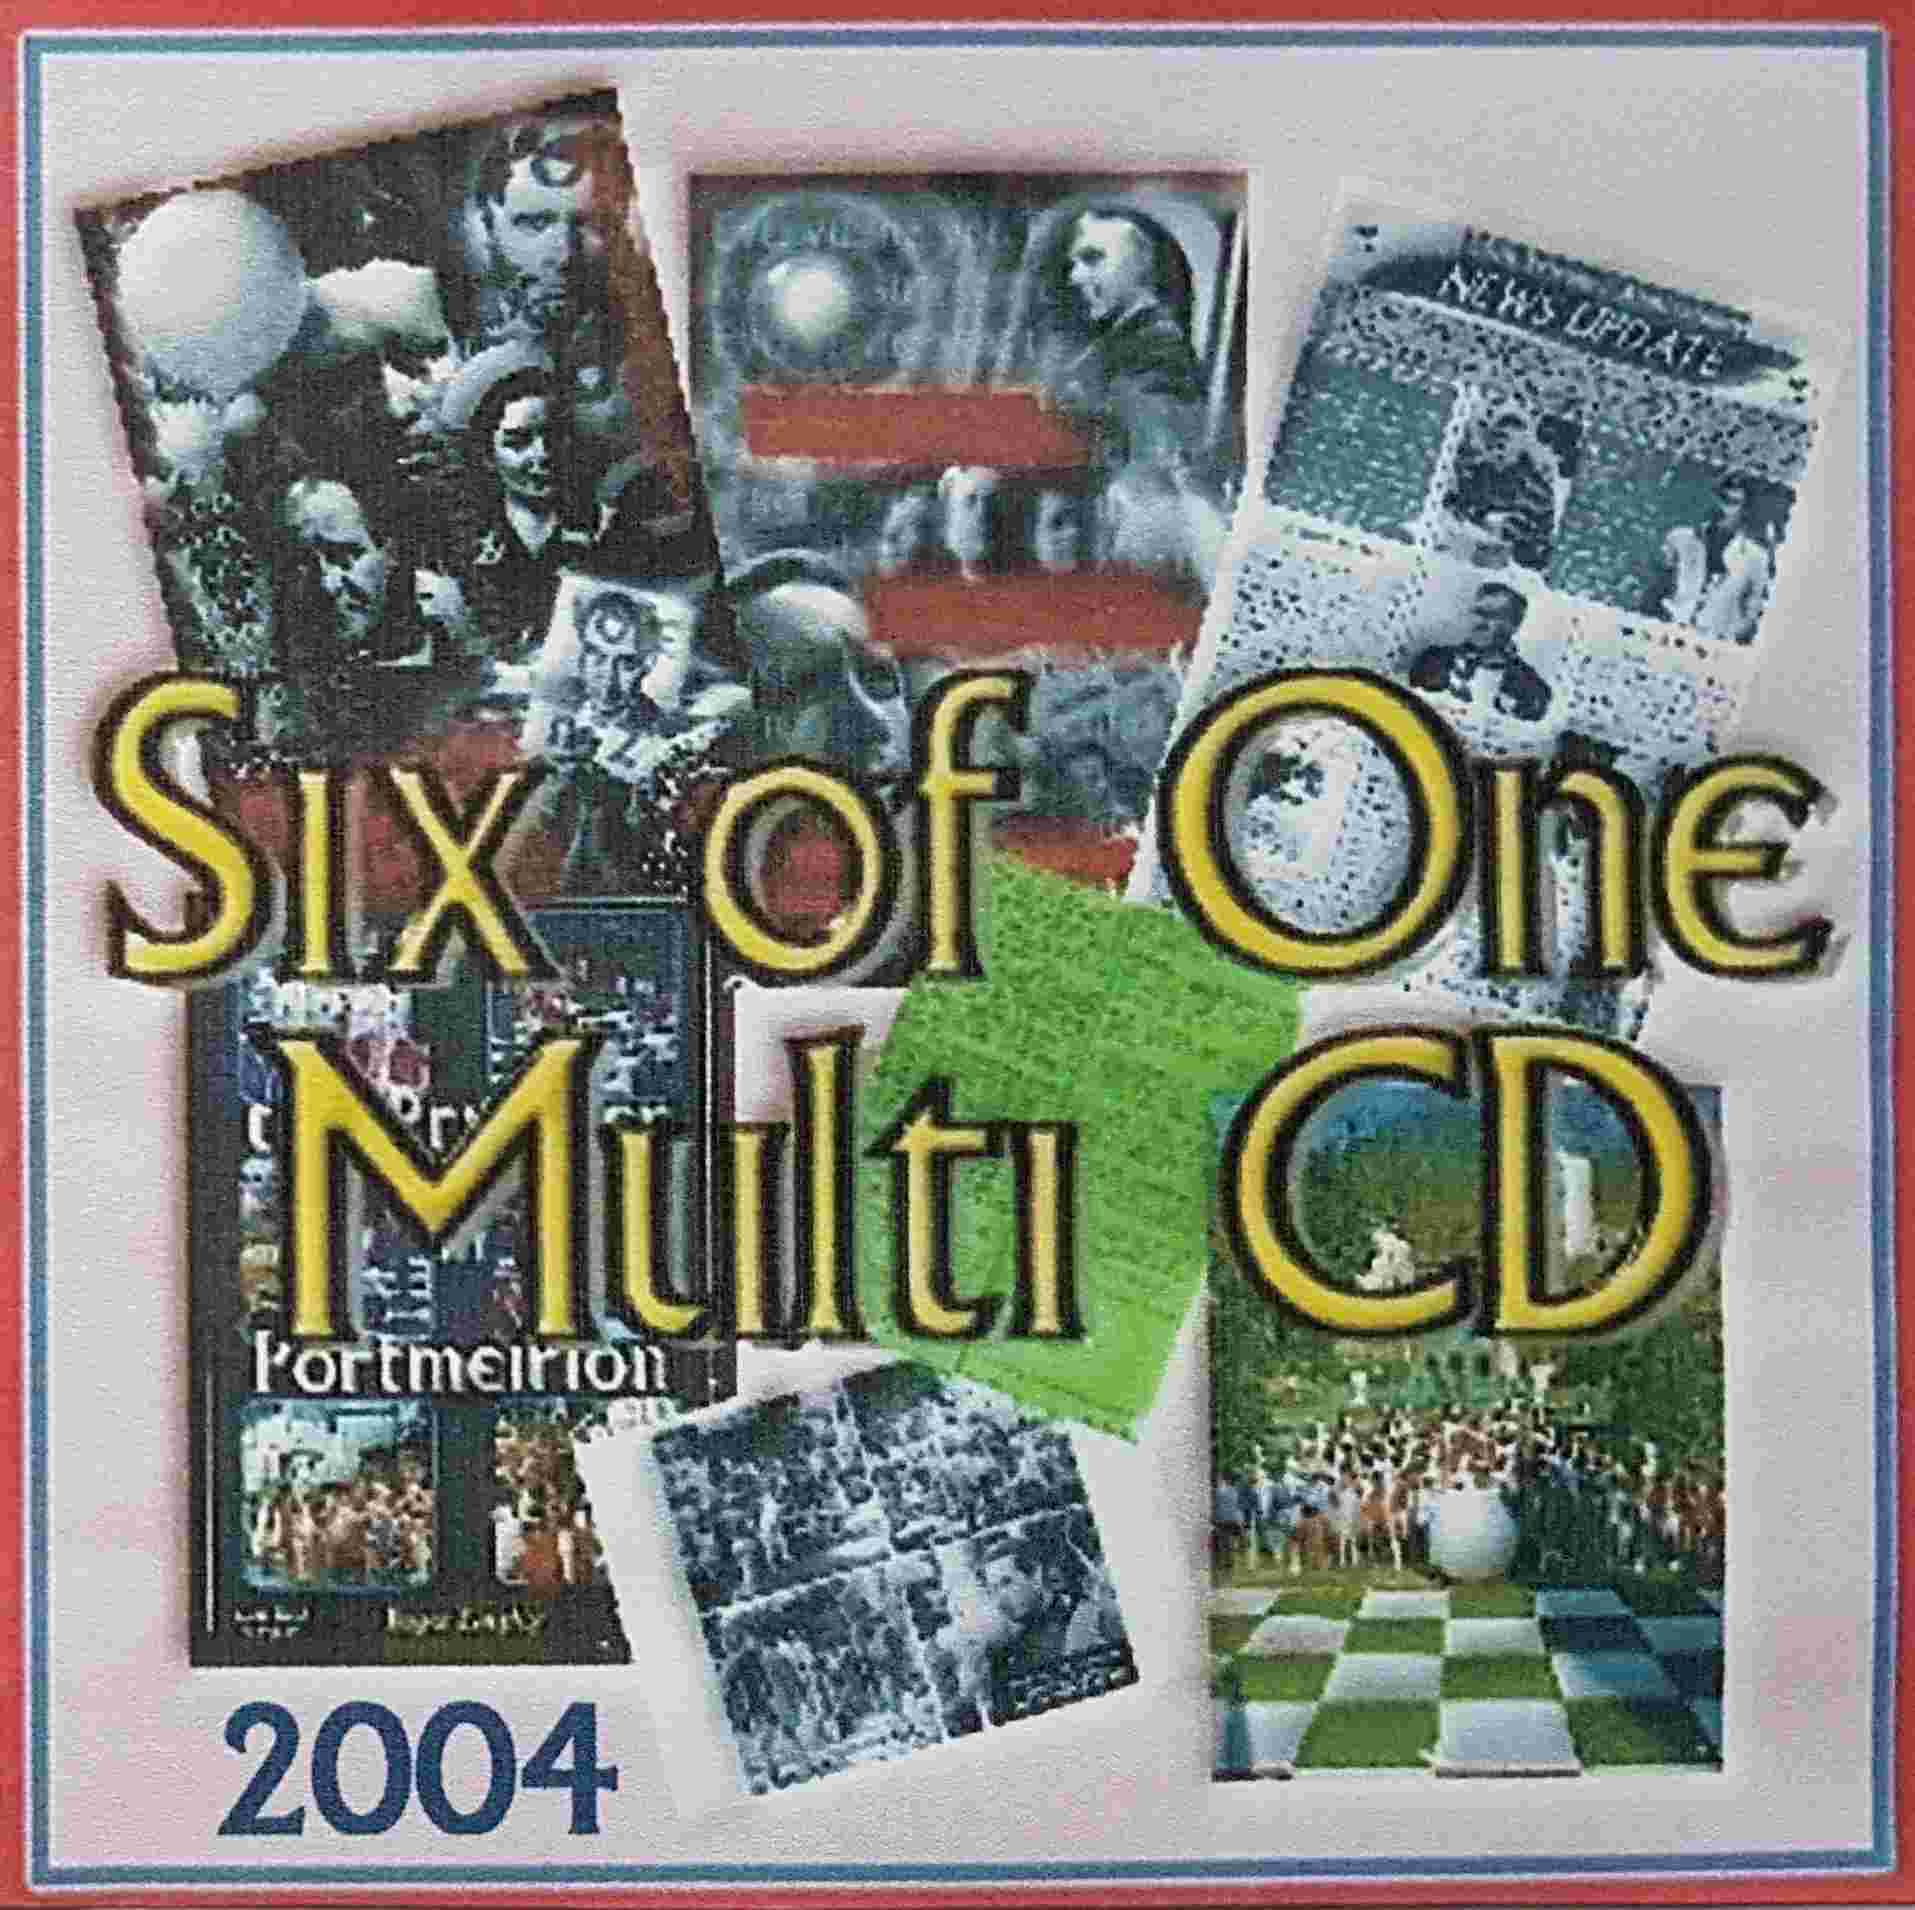 Picture of DVD-SOOMC Six of one multi CD by artist Unknown from ITV, Channel 4 and Channel 5 dvds library